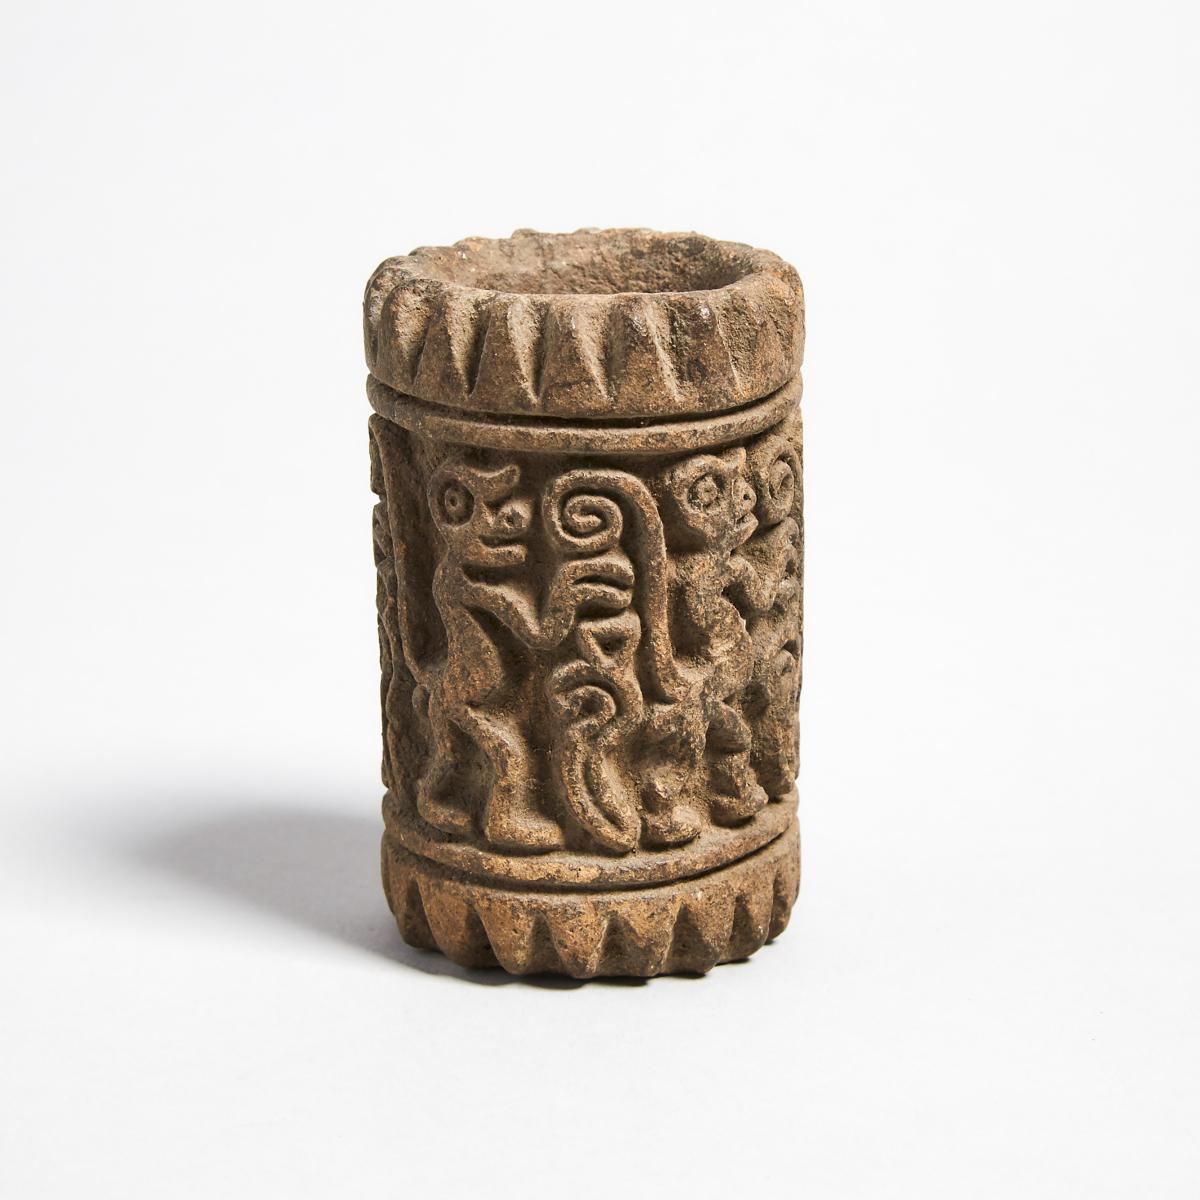 Manteno Pottery Roller Stamp with Monkey Parade, Ecuador 850-1600 A.D., length 3.26 in — 8.3 cm - Image 2 of 2